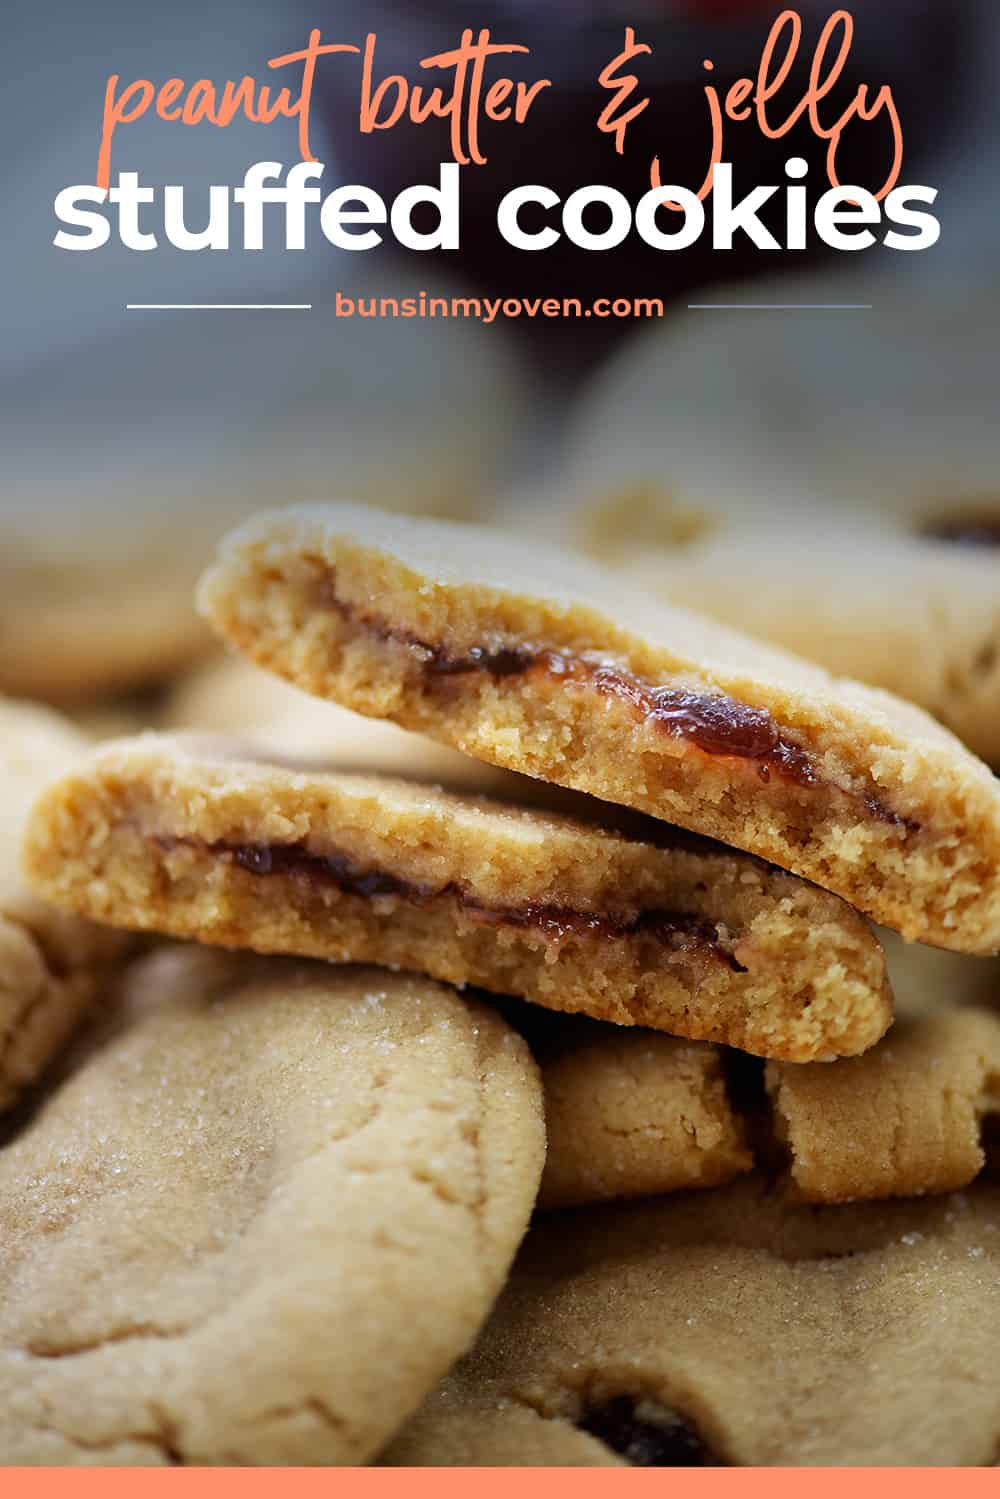 Peanut butter and jelly cookies piled on baking sheet.